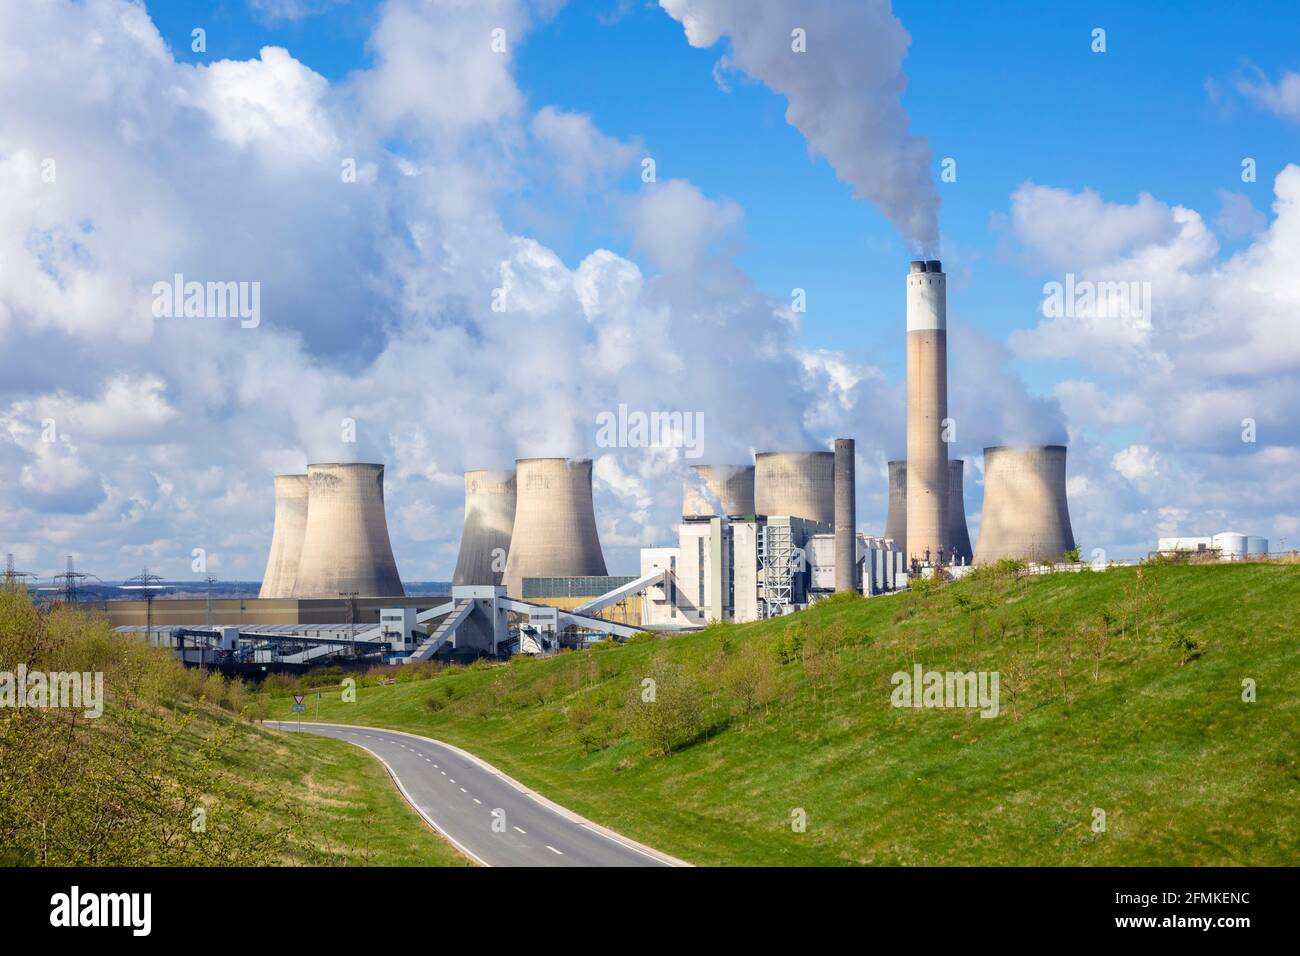 Winding road by Ratcliffe-on-Soar power station coal-fired with steam from the cooling towers Ratcliffe on soar Nottinghamshire England UK GB Europe Stock Photo